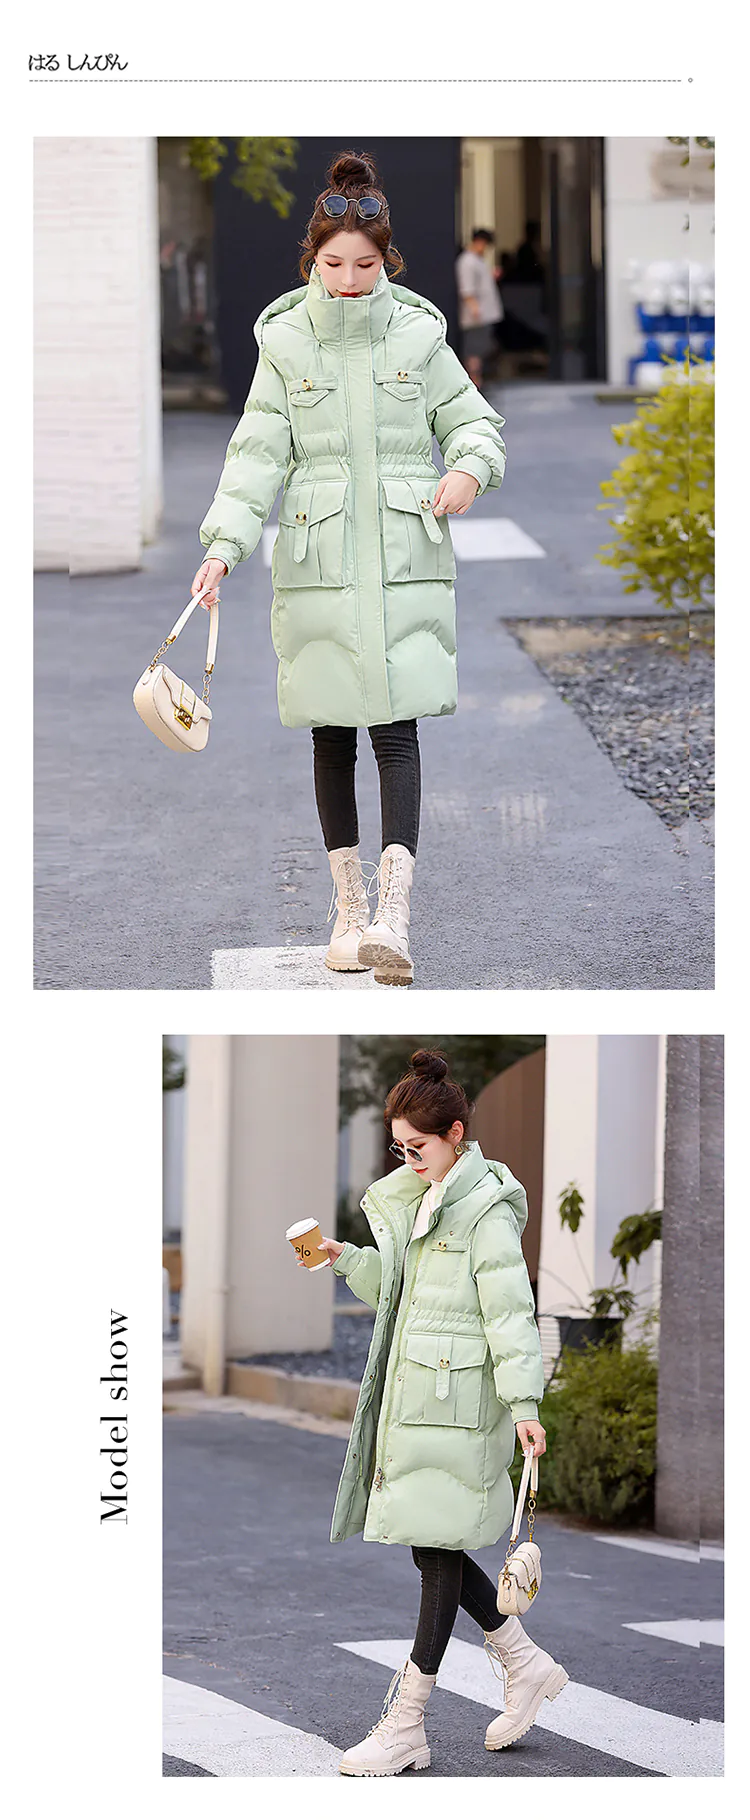 Fashion-Slim-Fit-Hooded-Zipper-Thick-Winter-Casual-Down-Coat14